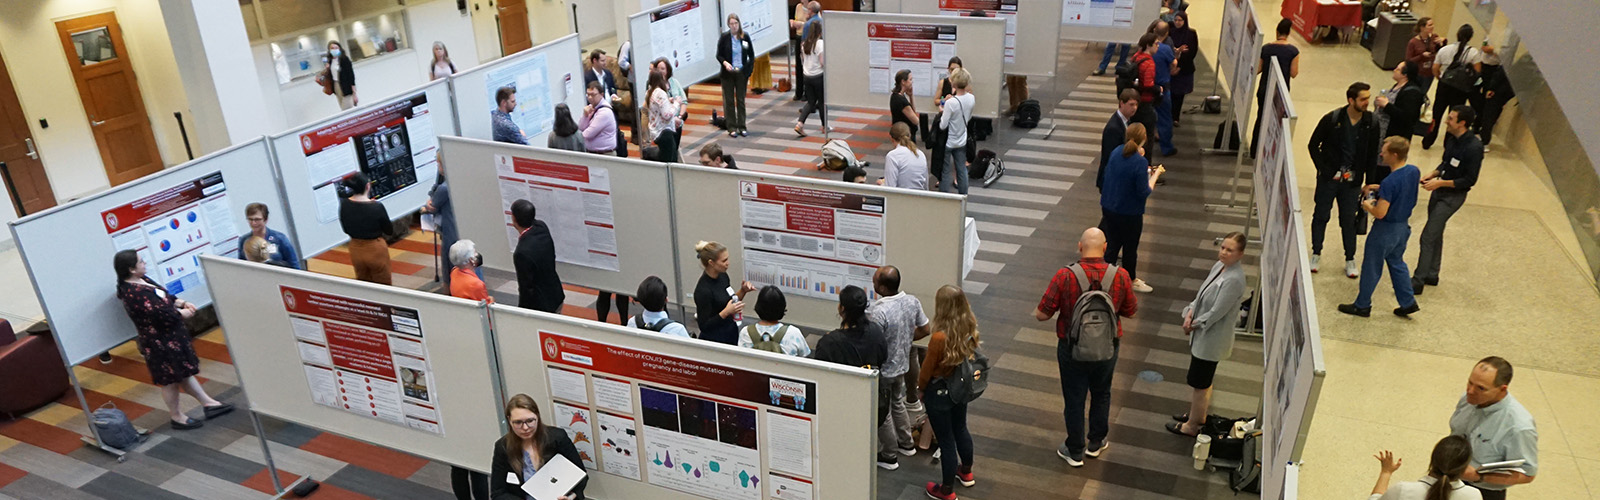 Dozens of people network around scientific posters at a conference.